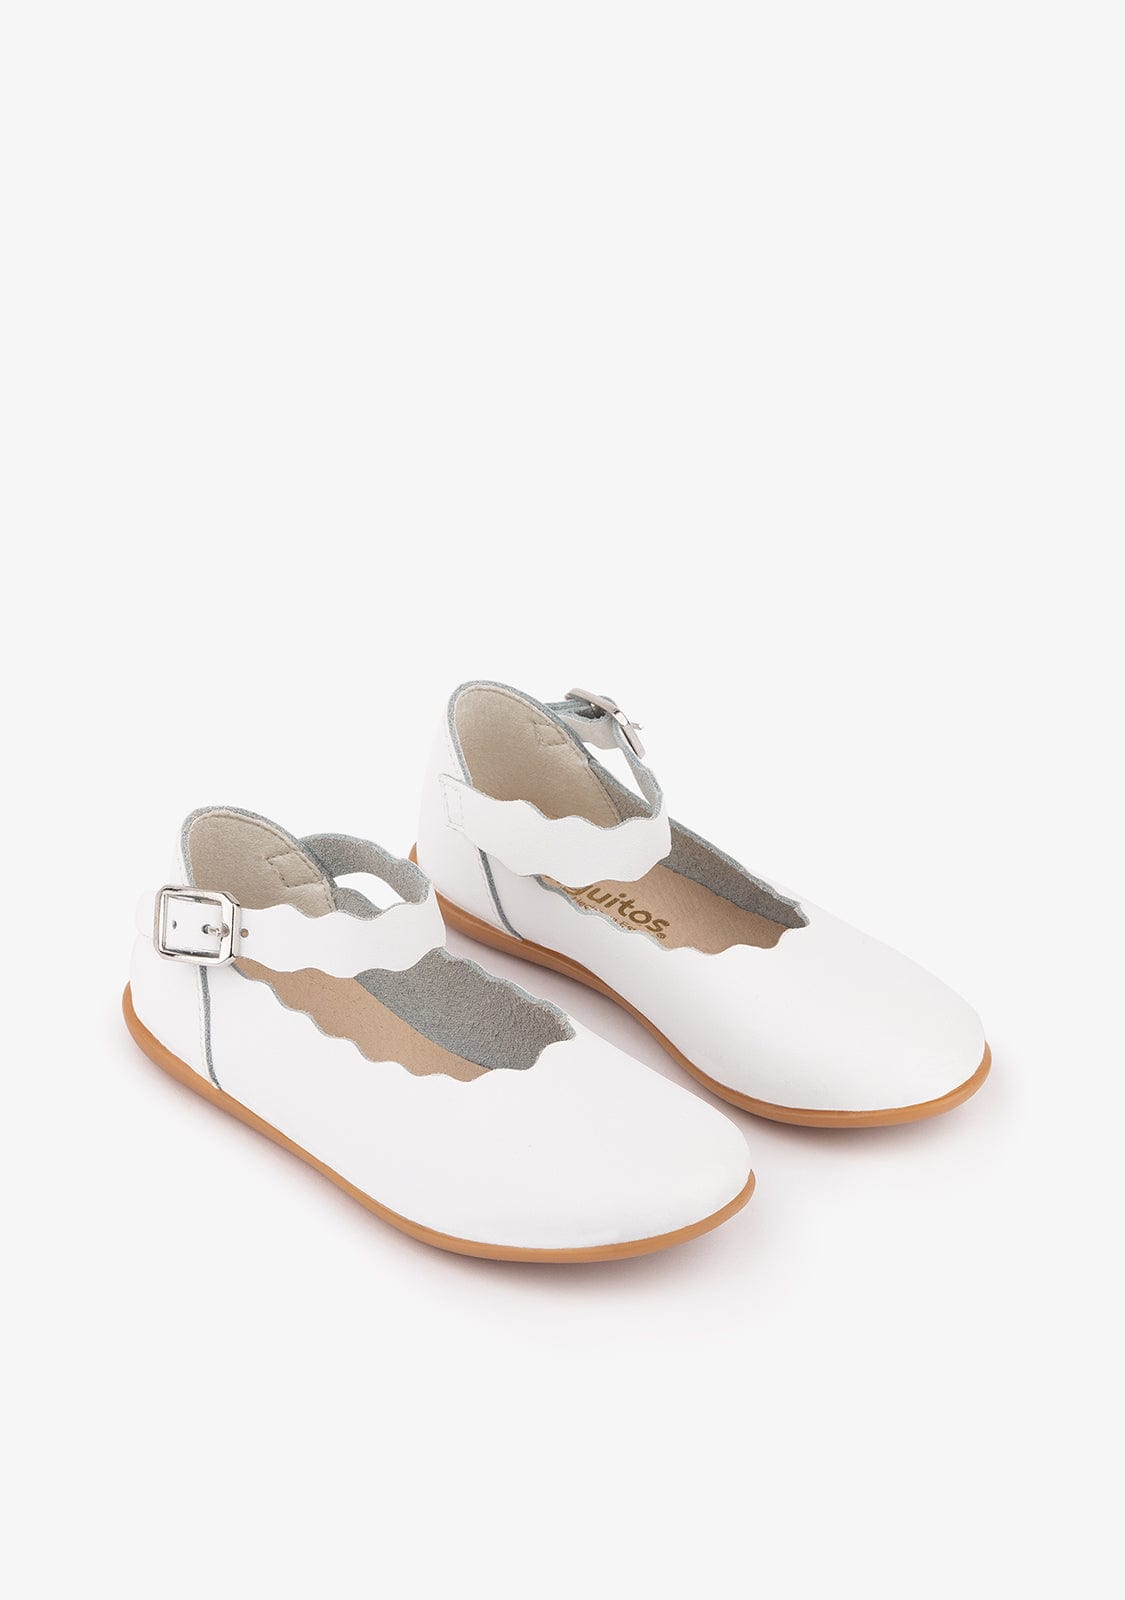 CONGUITOS Shoes Girl's White Waves Washable Leather Mary Janes